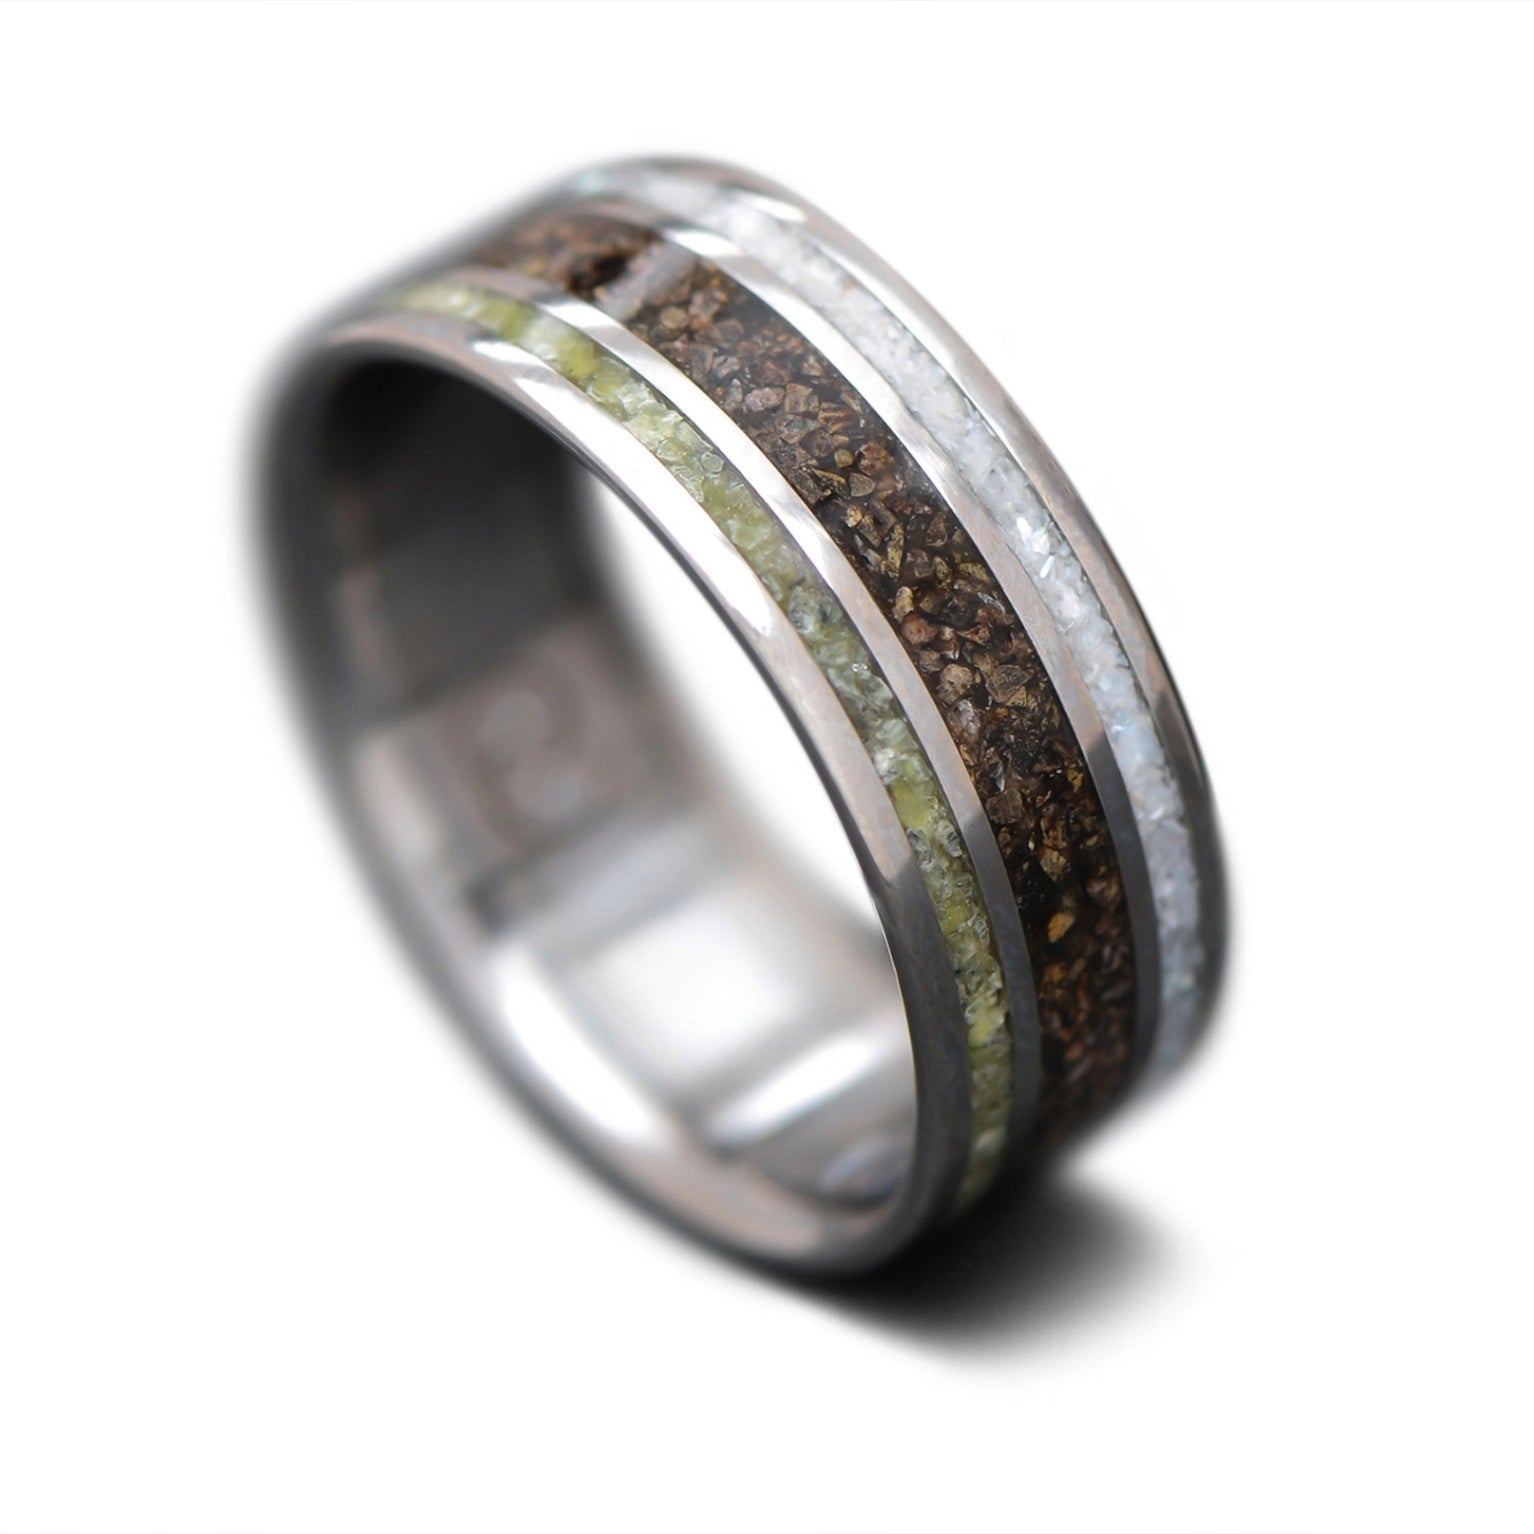 Unique Titanium Wedding Band with T-Rex, Jade & Mother of Pearl Inlay